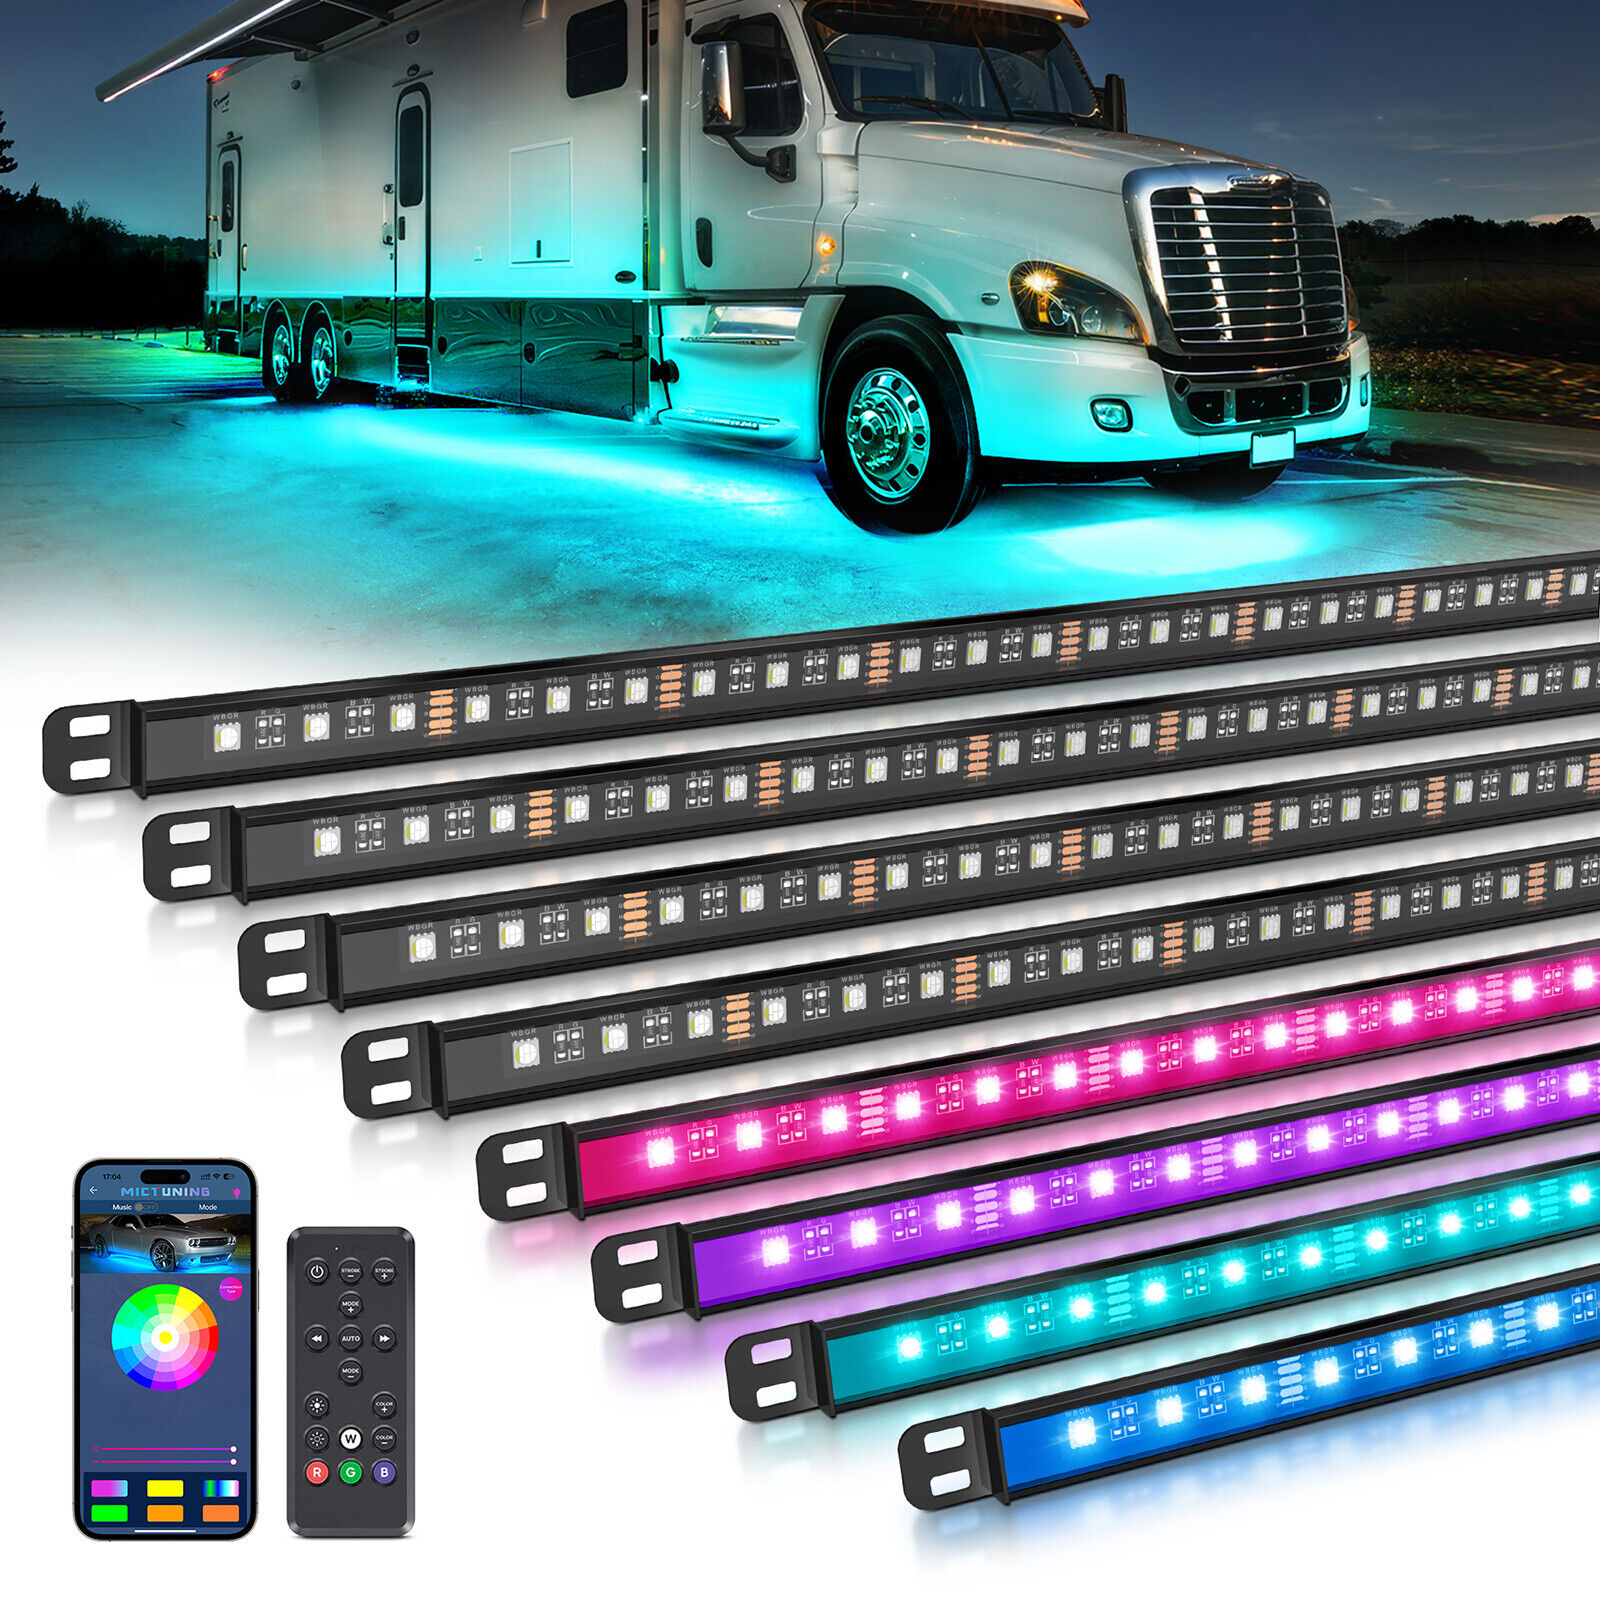 MICTUNING N8 RGBW Underglow Light Bars for RVs, Neon Underbody LED Light strips